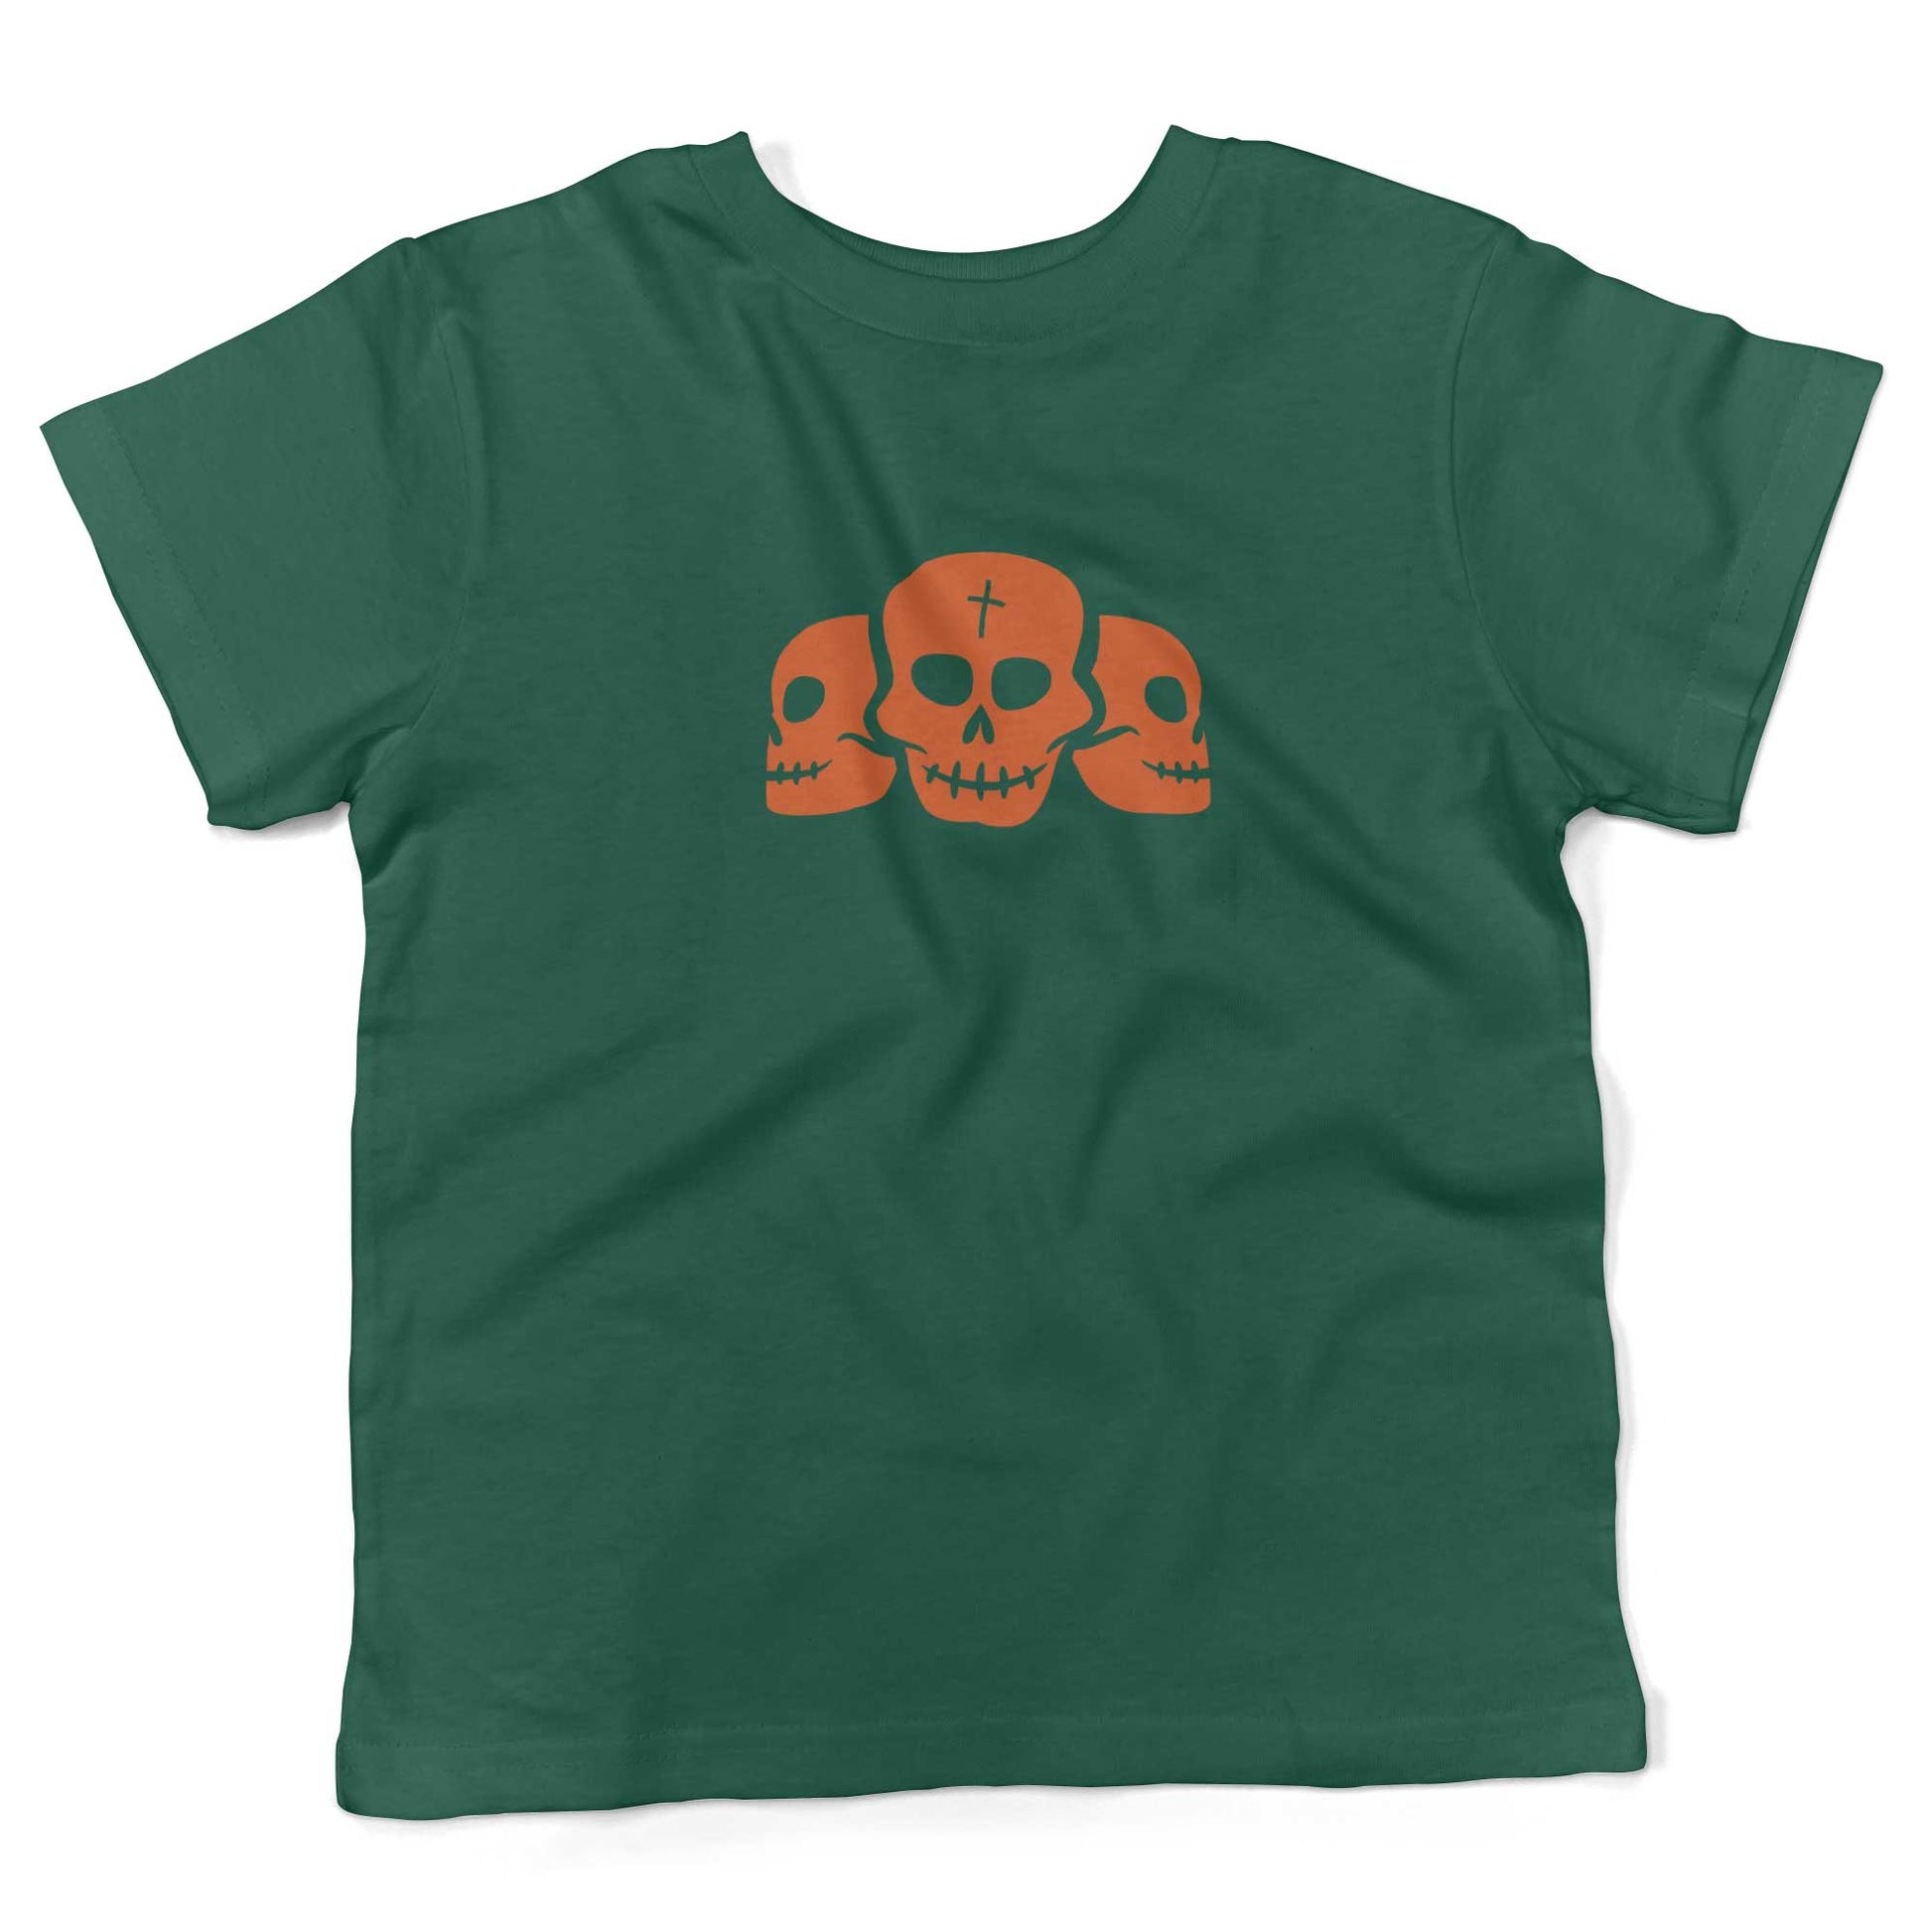 Day Of The Dead Skulls Toddler Shirt-Kelly Green-2T